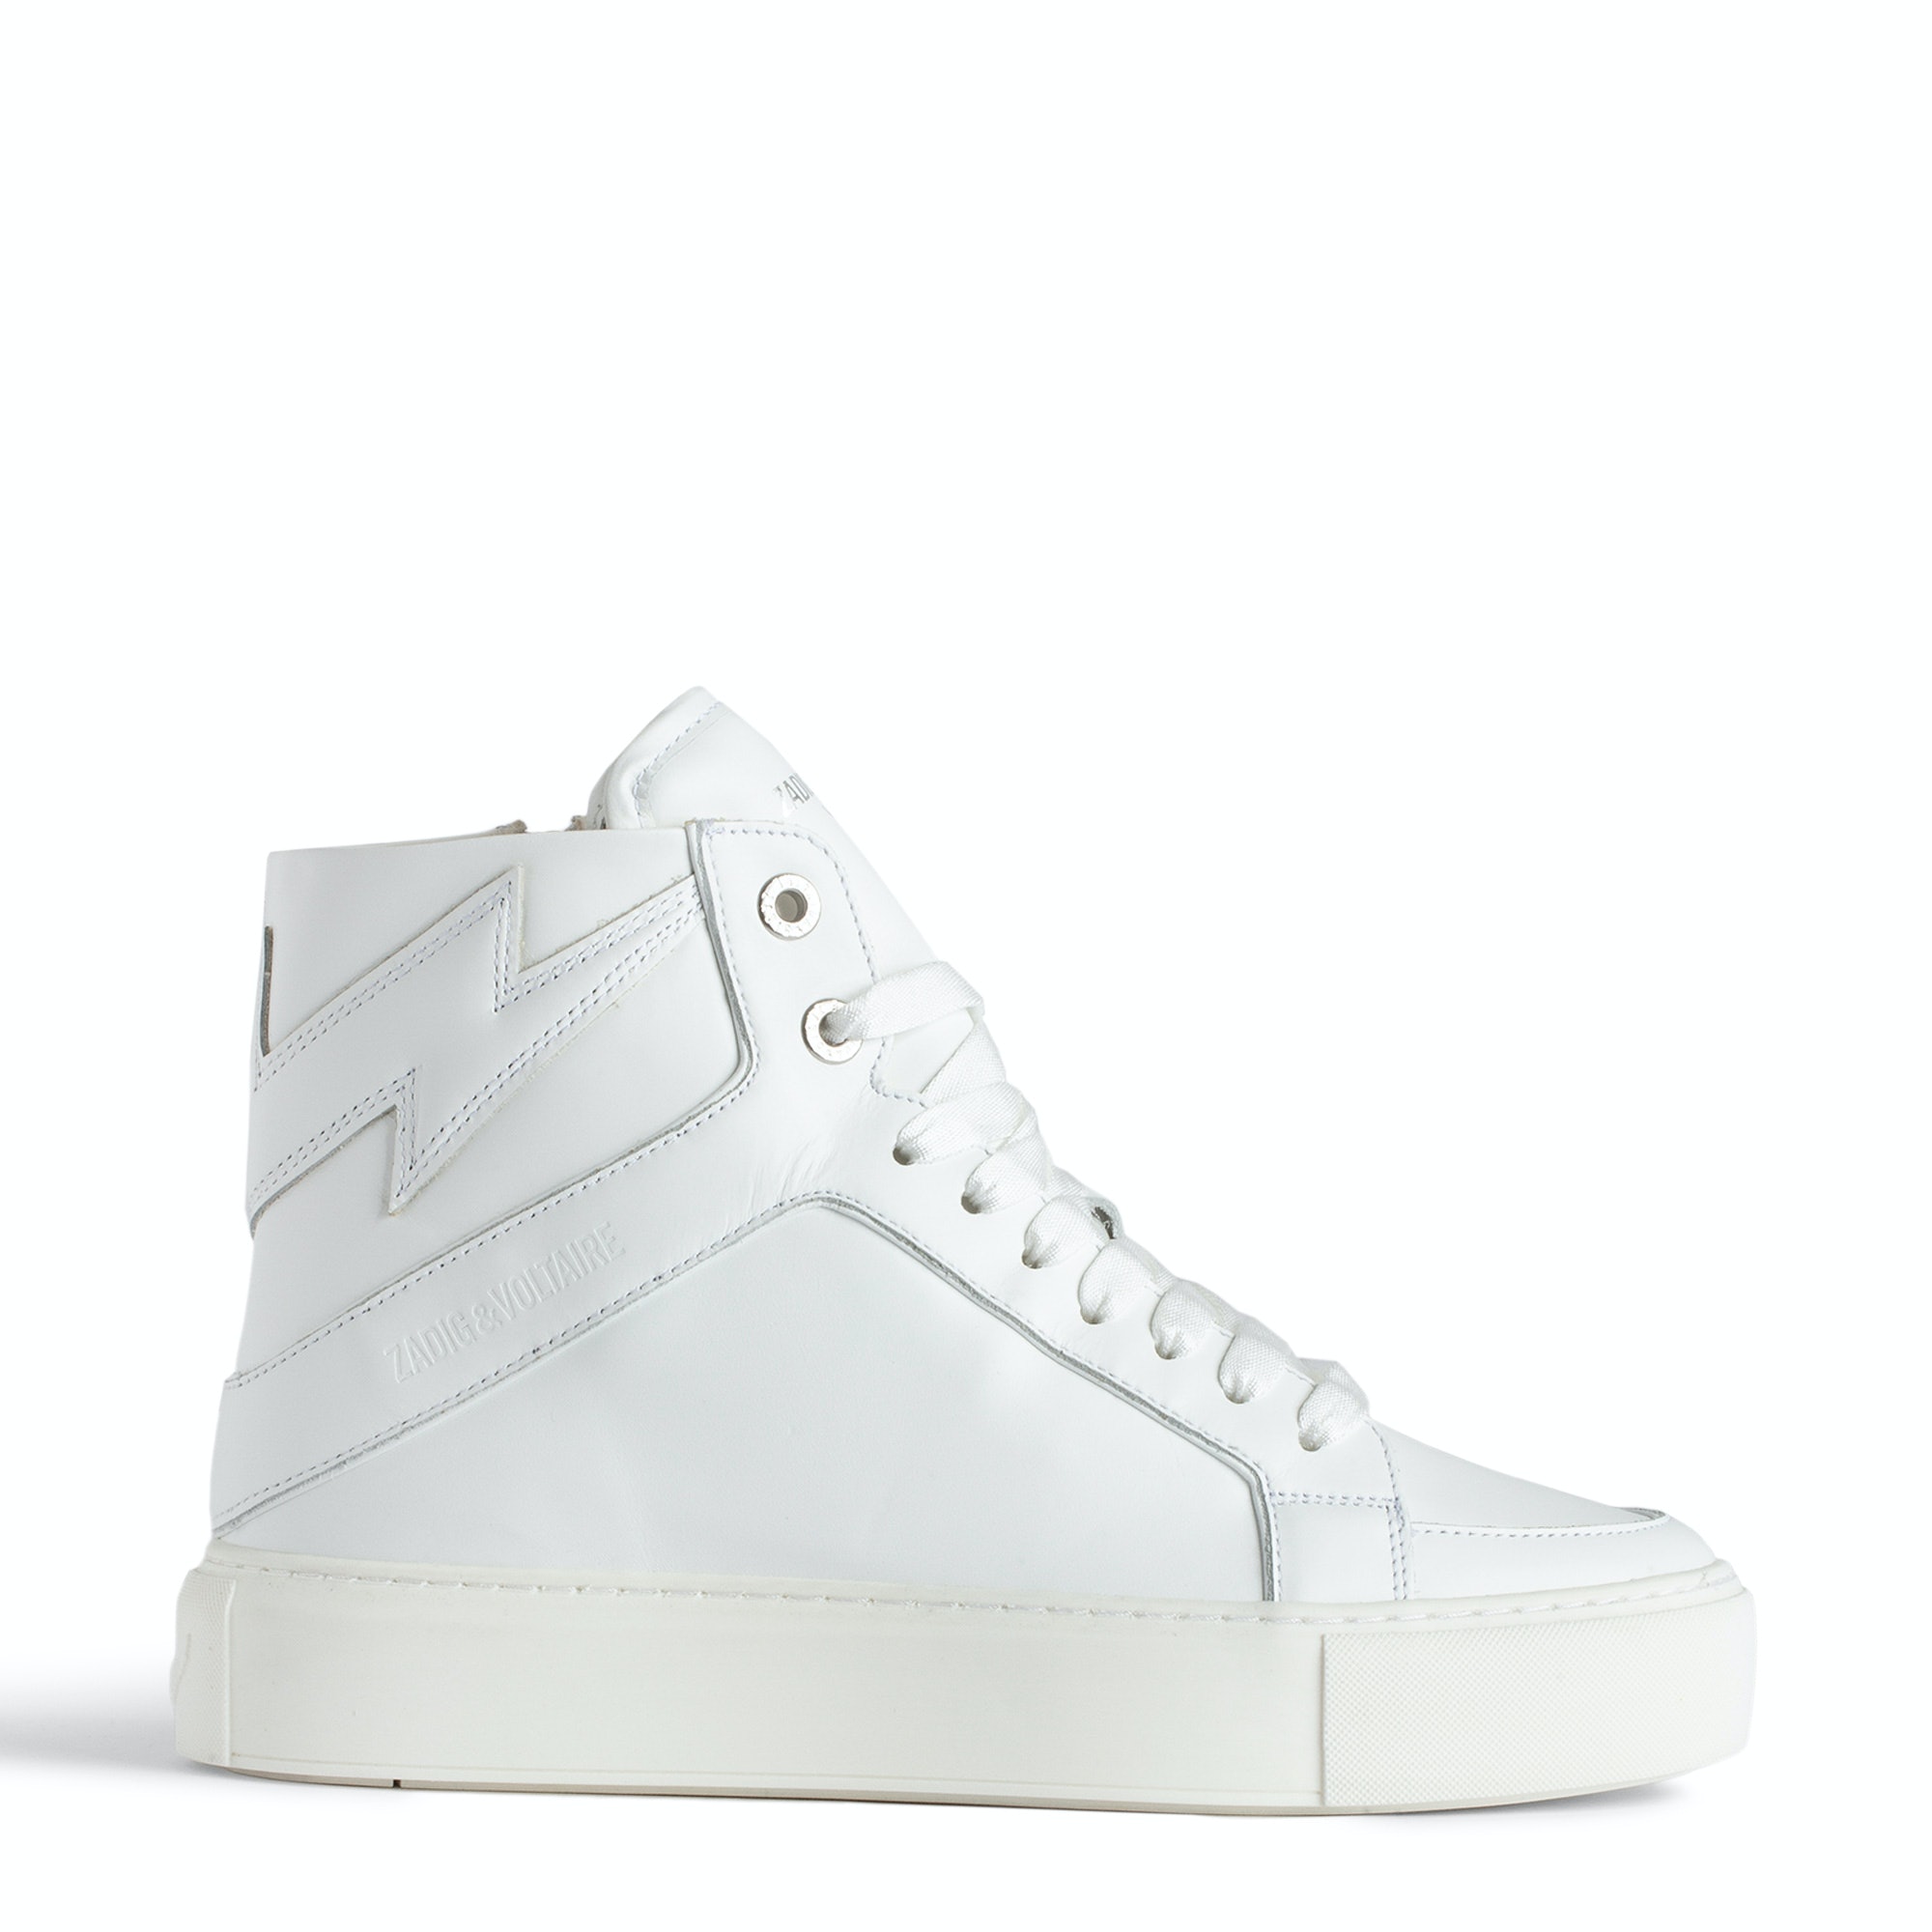 Sneakers Montantes À Plateforme Zv1747 High Flash Blanc - Taille 40 - Femme